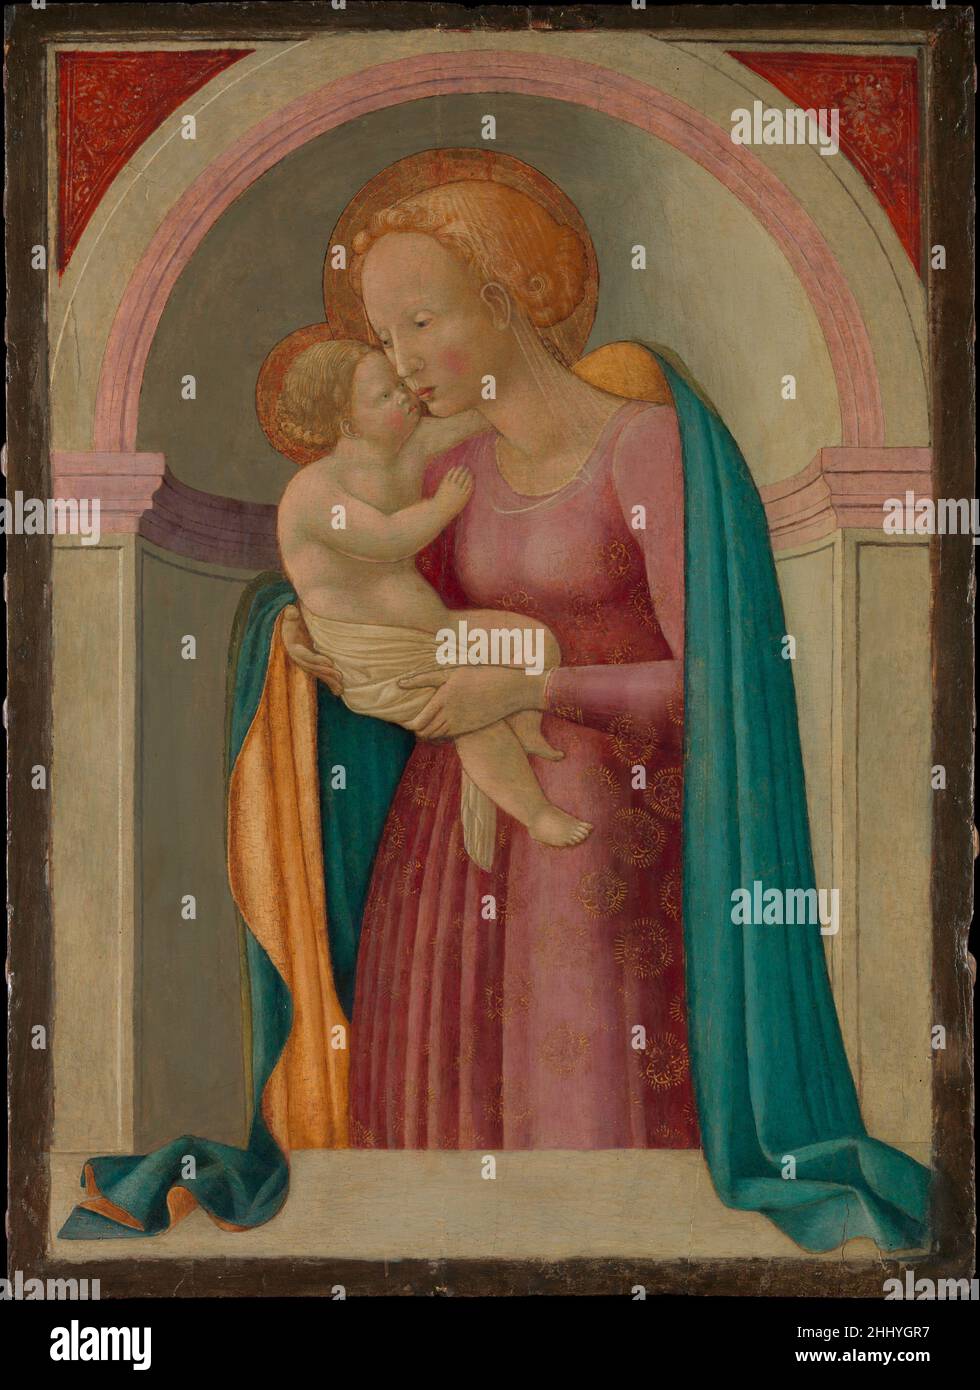 Madonna and Child Master of the Lanckoronski Annunciation Italian The author of this damaged but elegant picture derives his name from a picture in the Museum of Fine Arts, San Francisco. He was much influenced by Fra Angelico, Domenico Veneziano, and the sculptor Lorenzo Ghiberti.. Madonna and Child  437011 Stock Photo